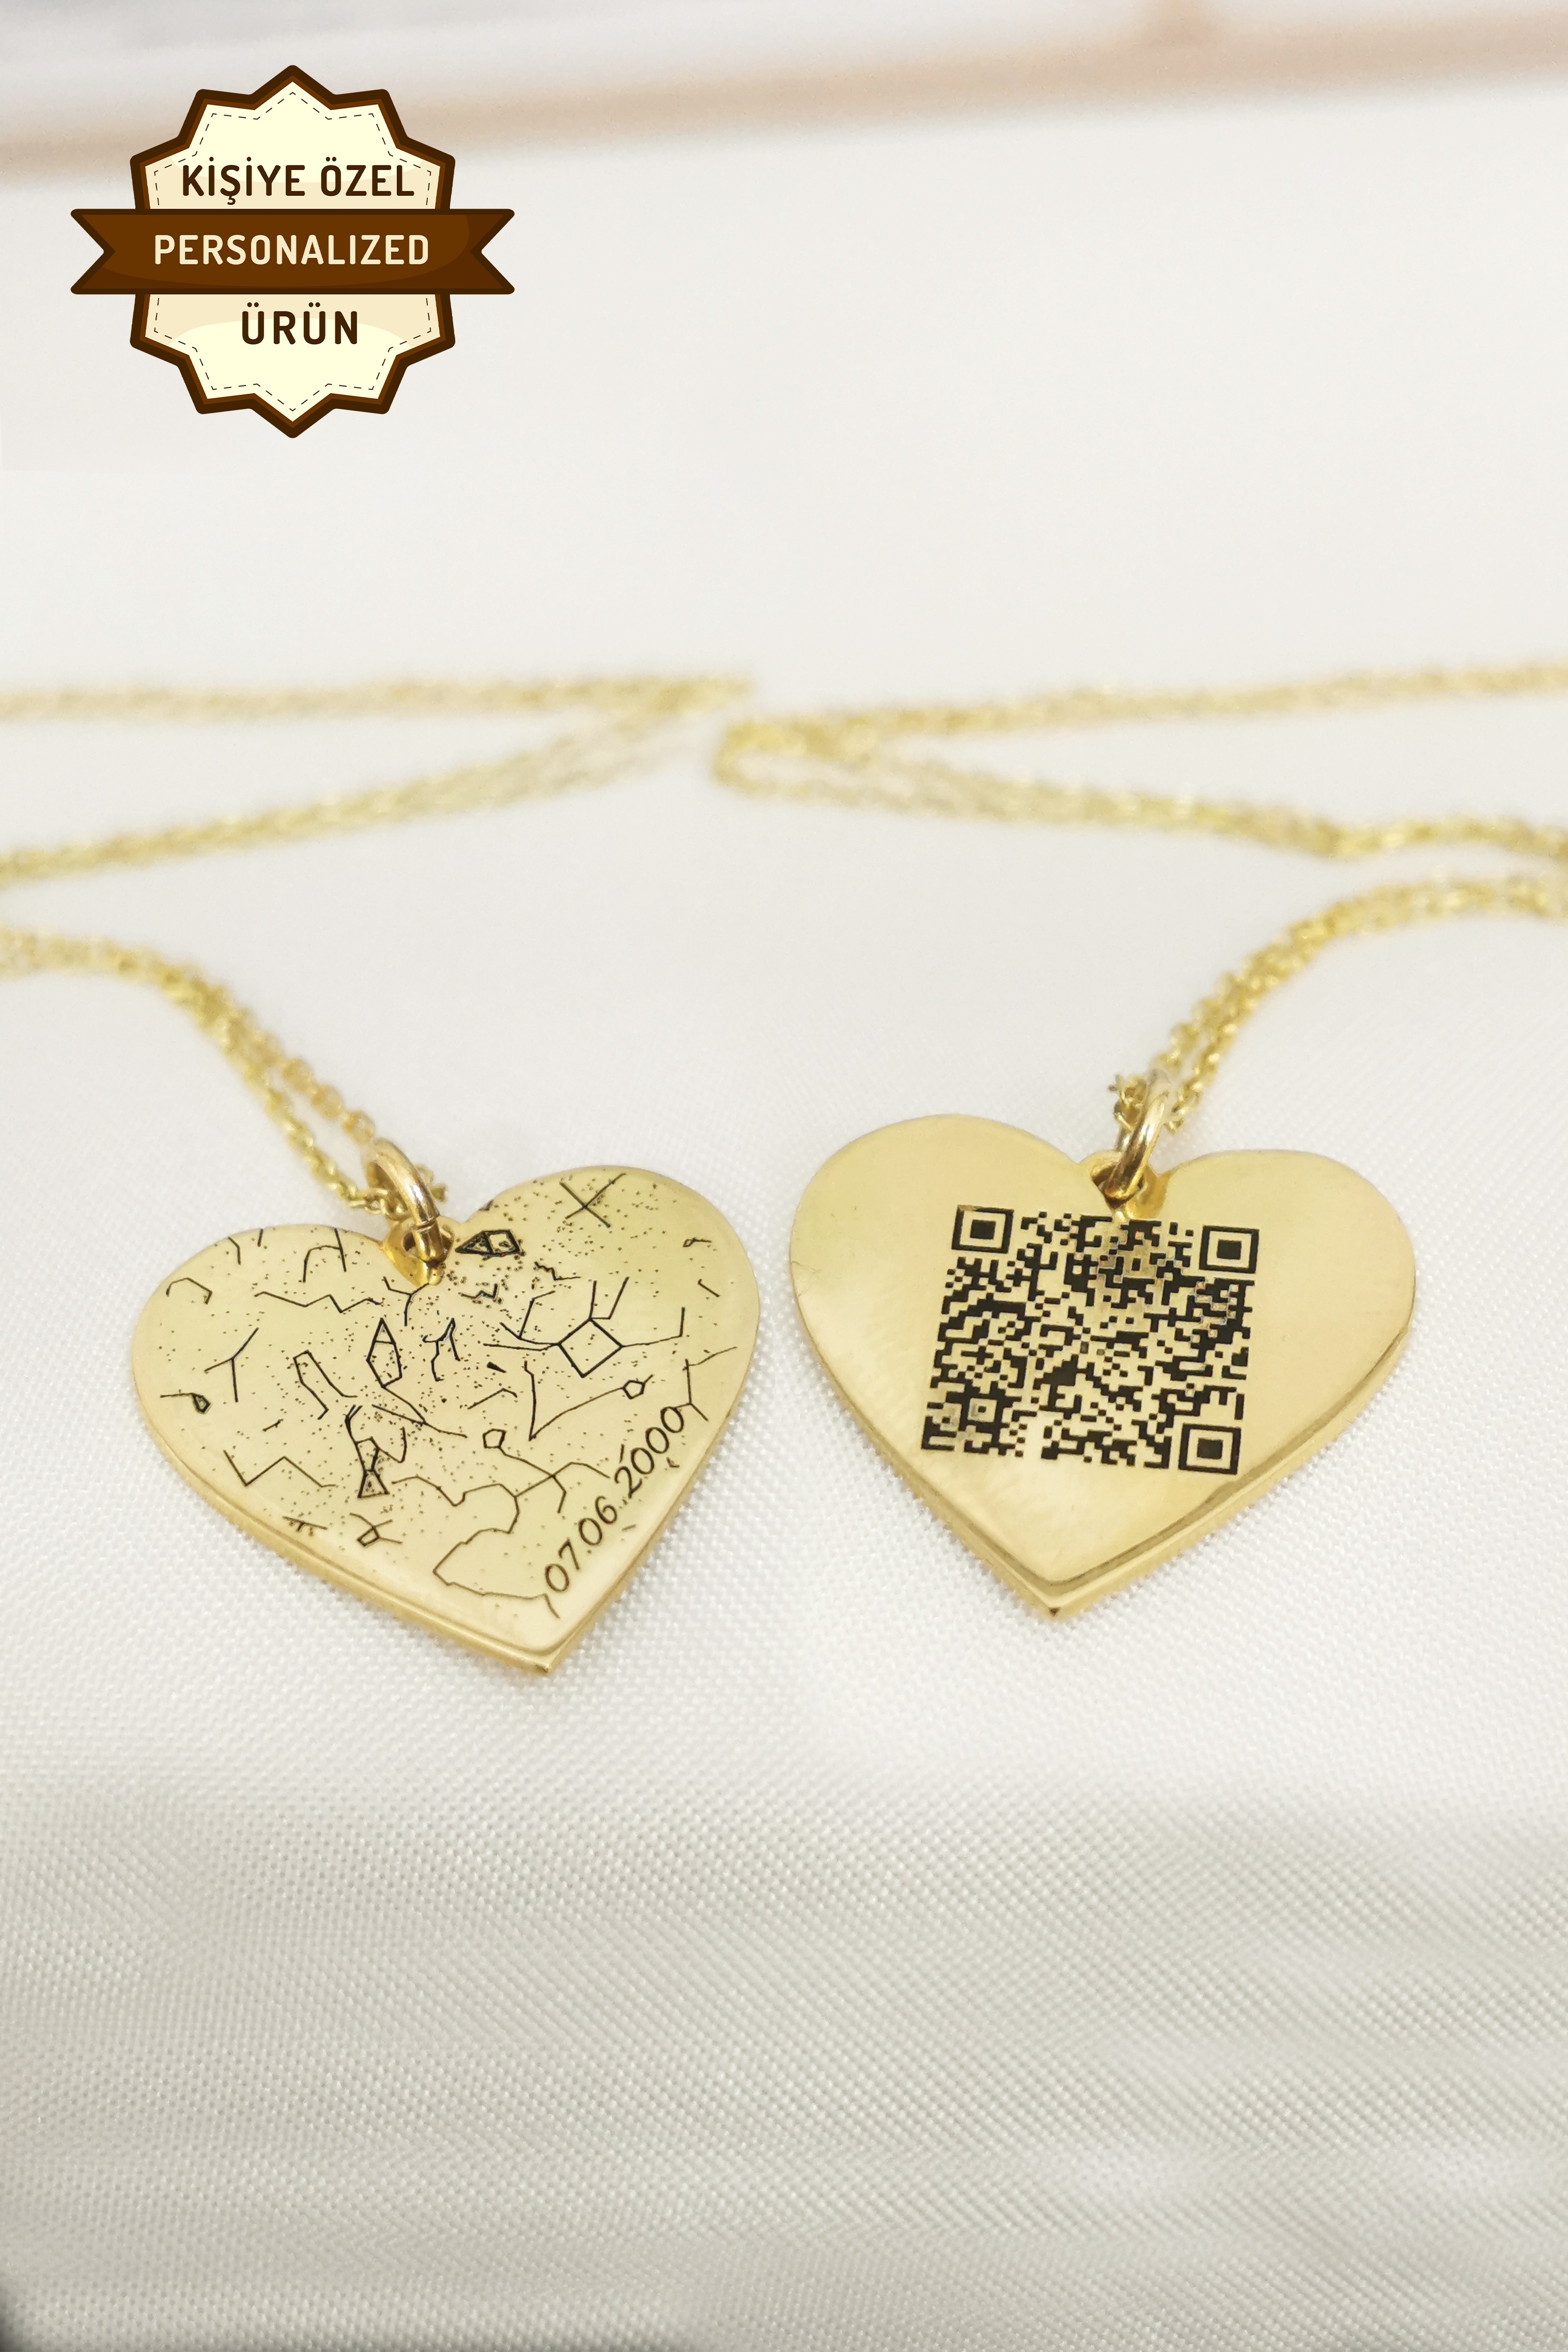 Engraved Sky Map & QR Code Heart Necklace